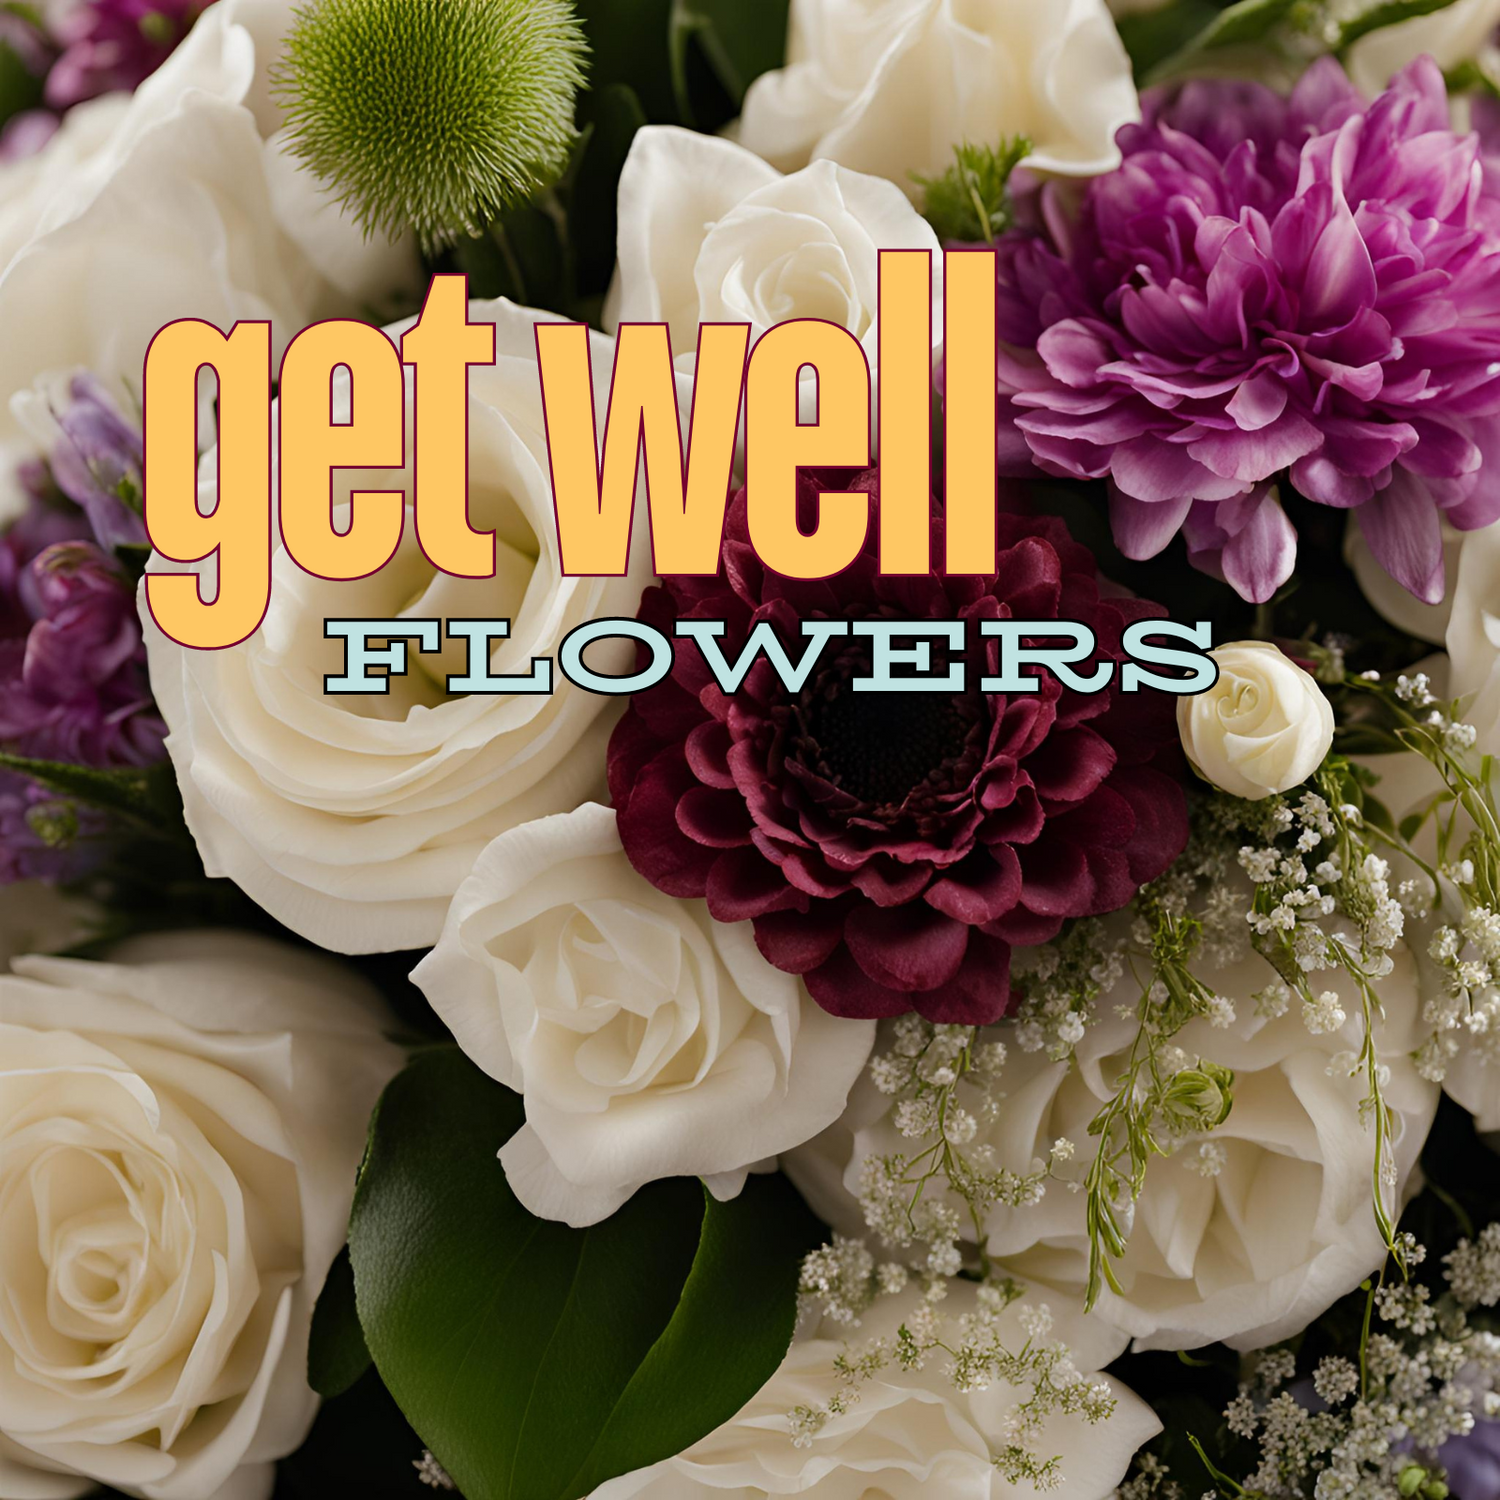 A banner for the Get Well Soon category on Bud Weismiller's website.  It feathers calming and healing flowers in the background.